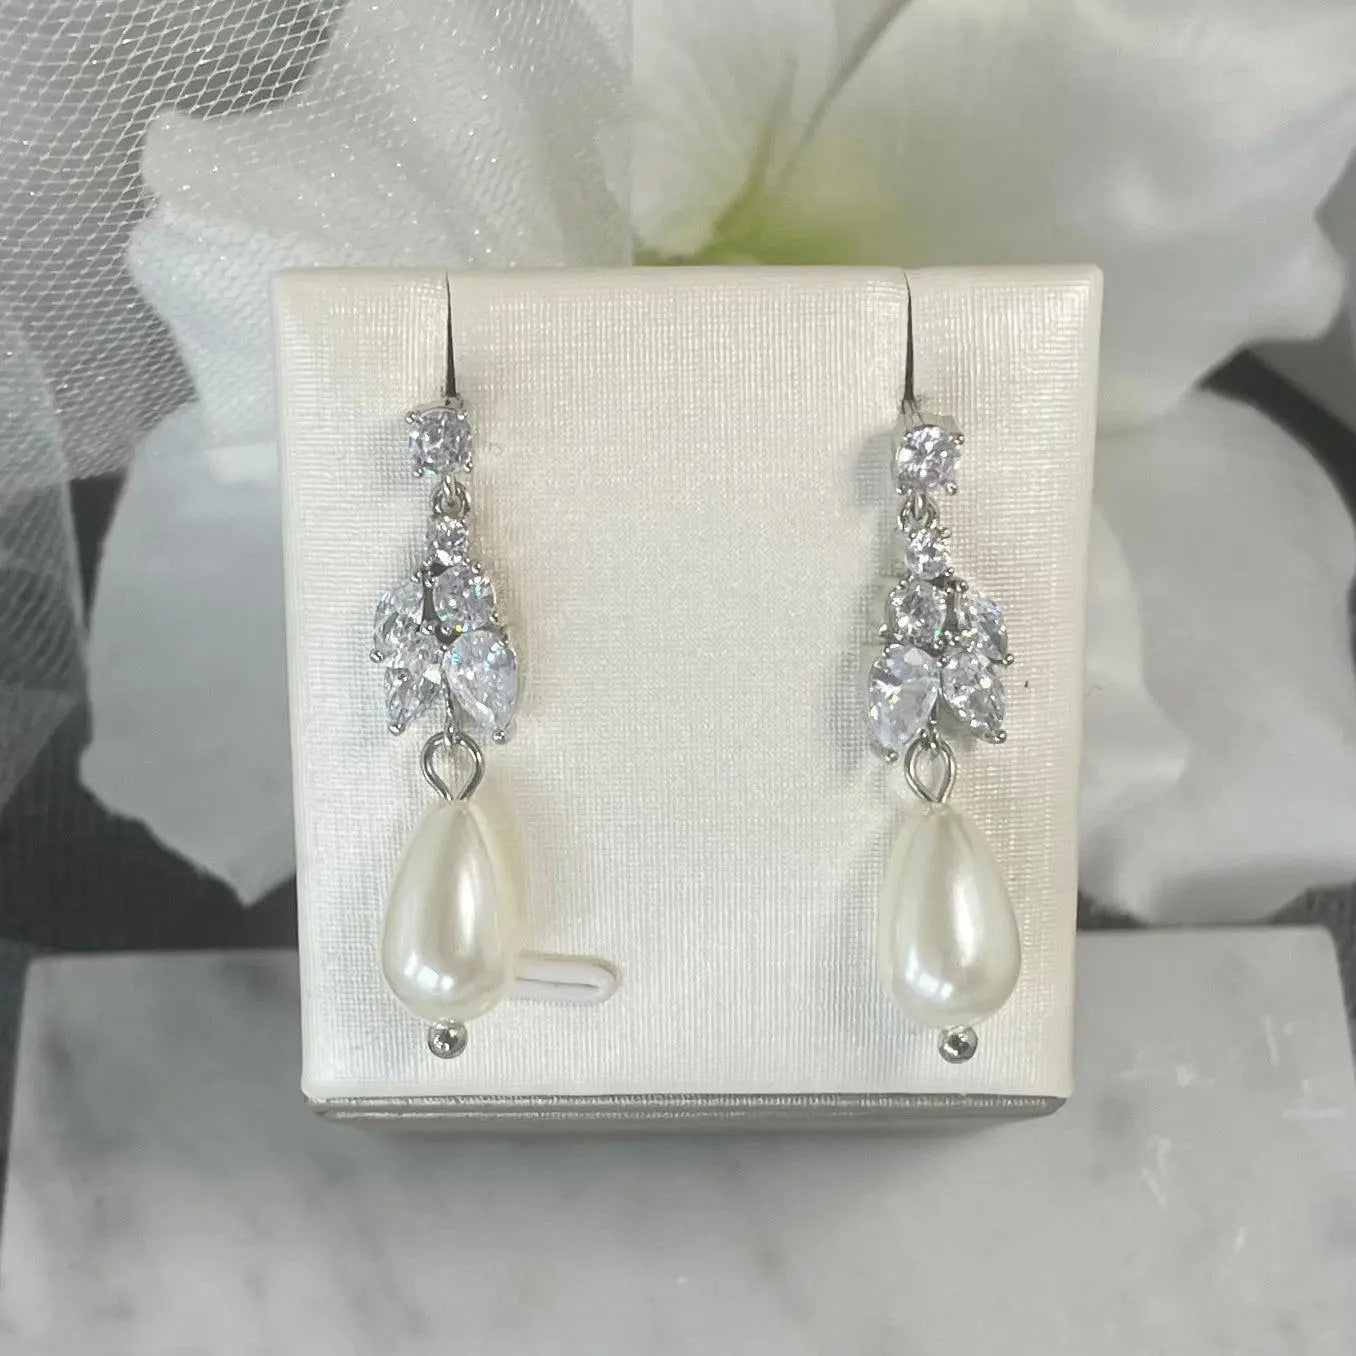 Sadie crystal pearl earrings with round top crystal, leaf-like crystal cluster, and teardrop pearl, perfect for adding timeless elegance to bridal attire.